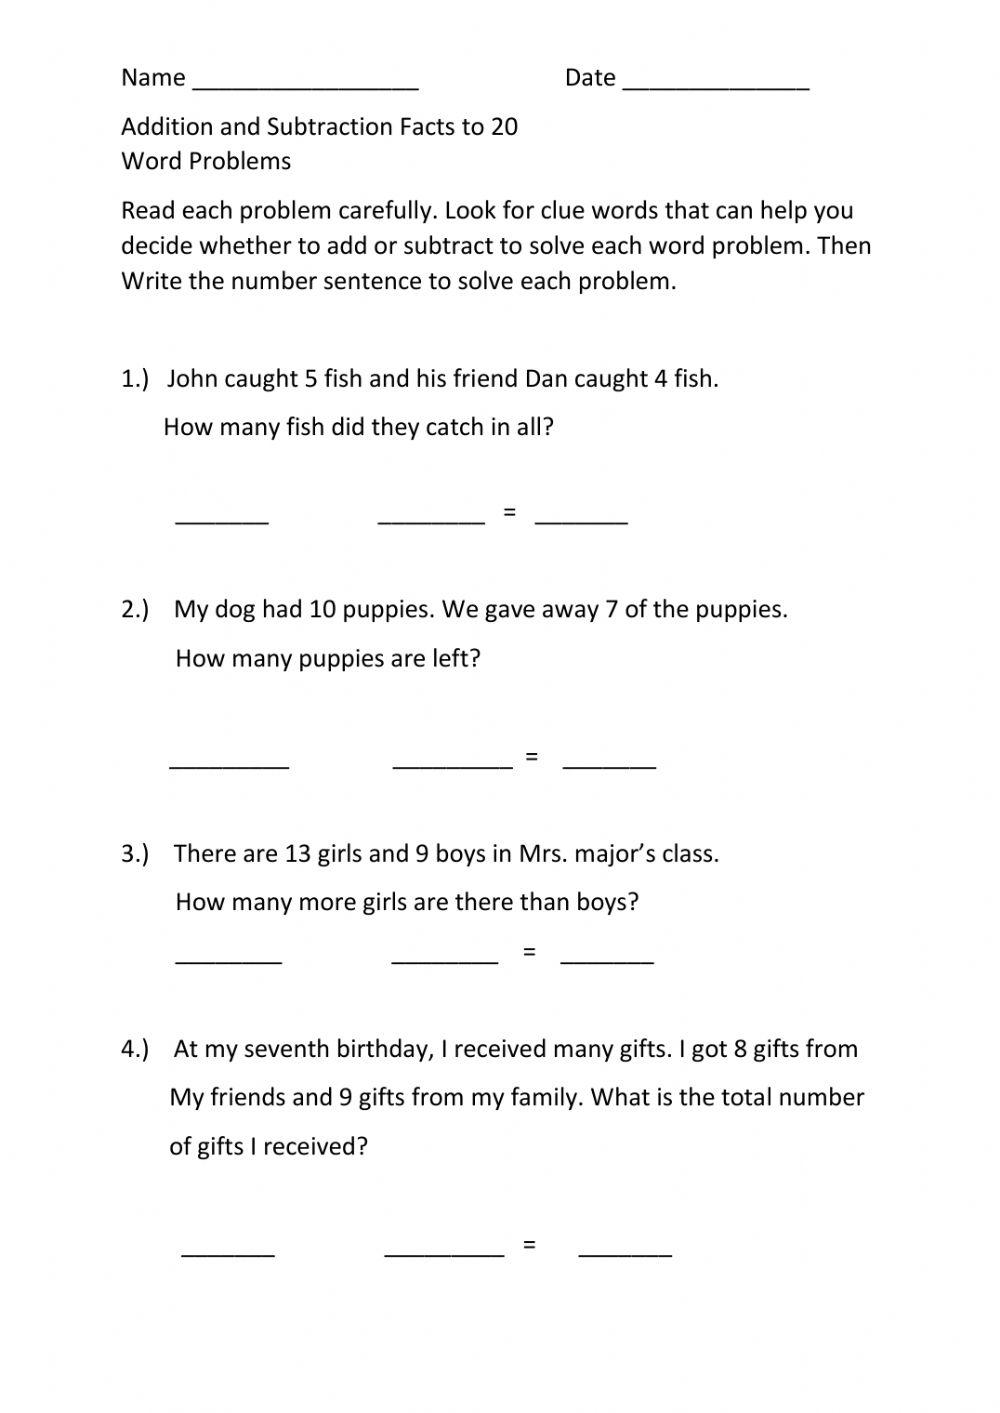 Addition and Subtraction Facts to 20 Word Problems